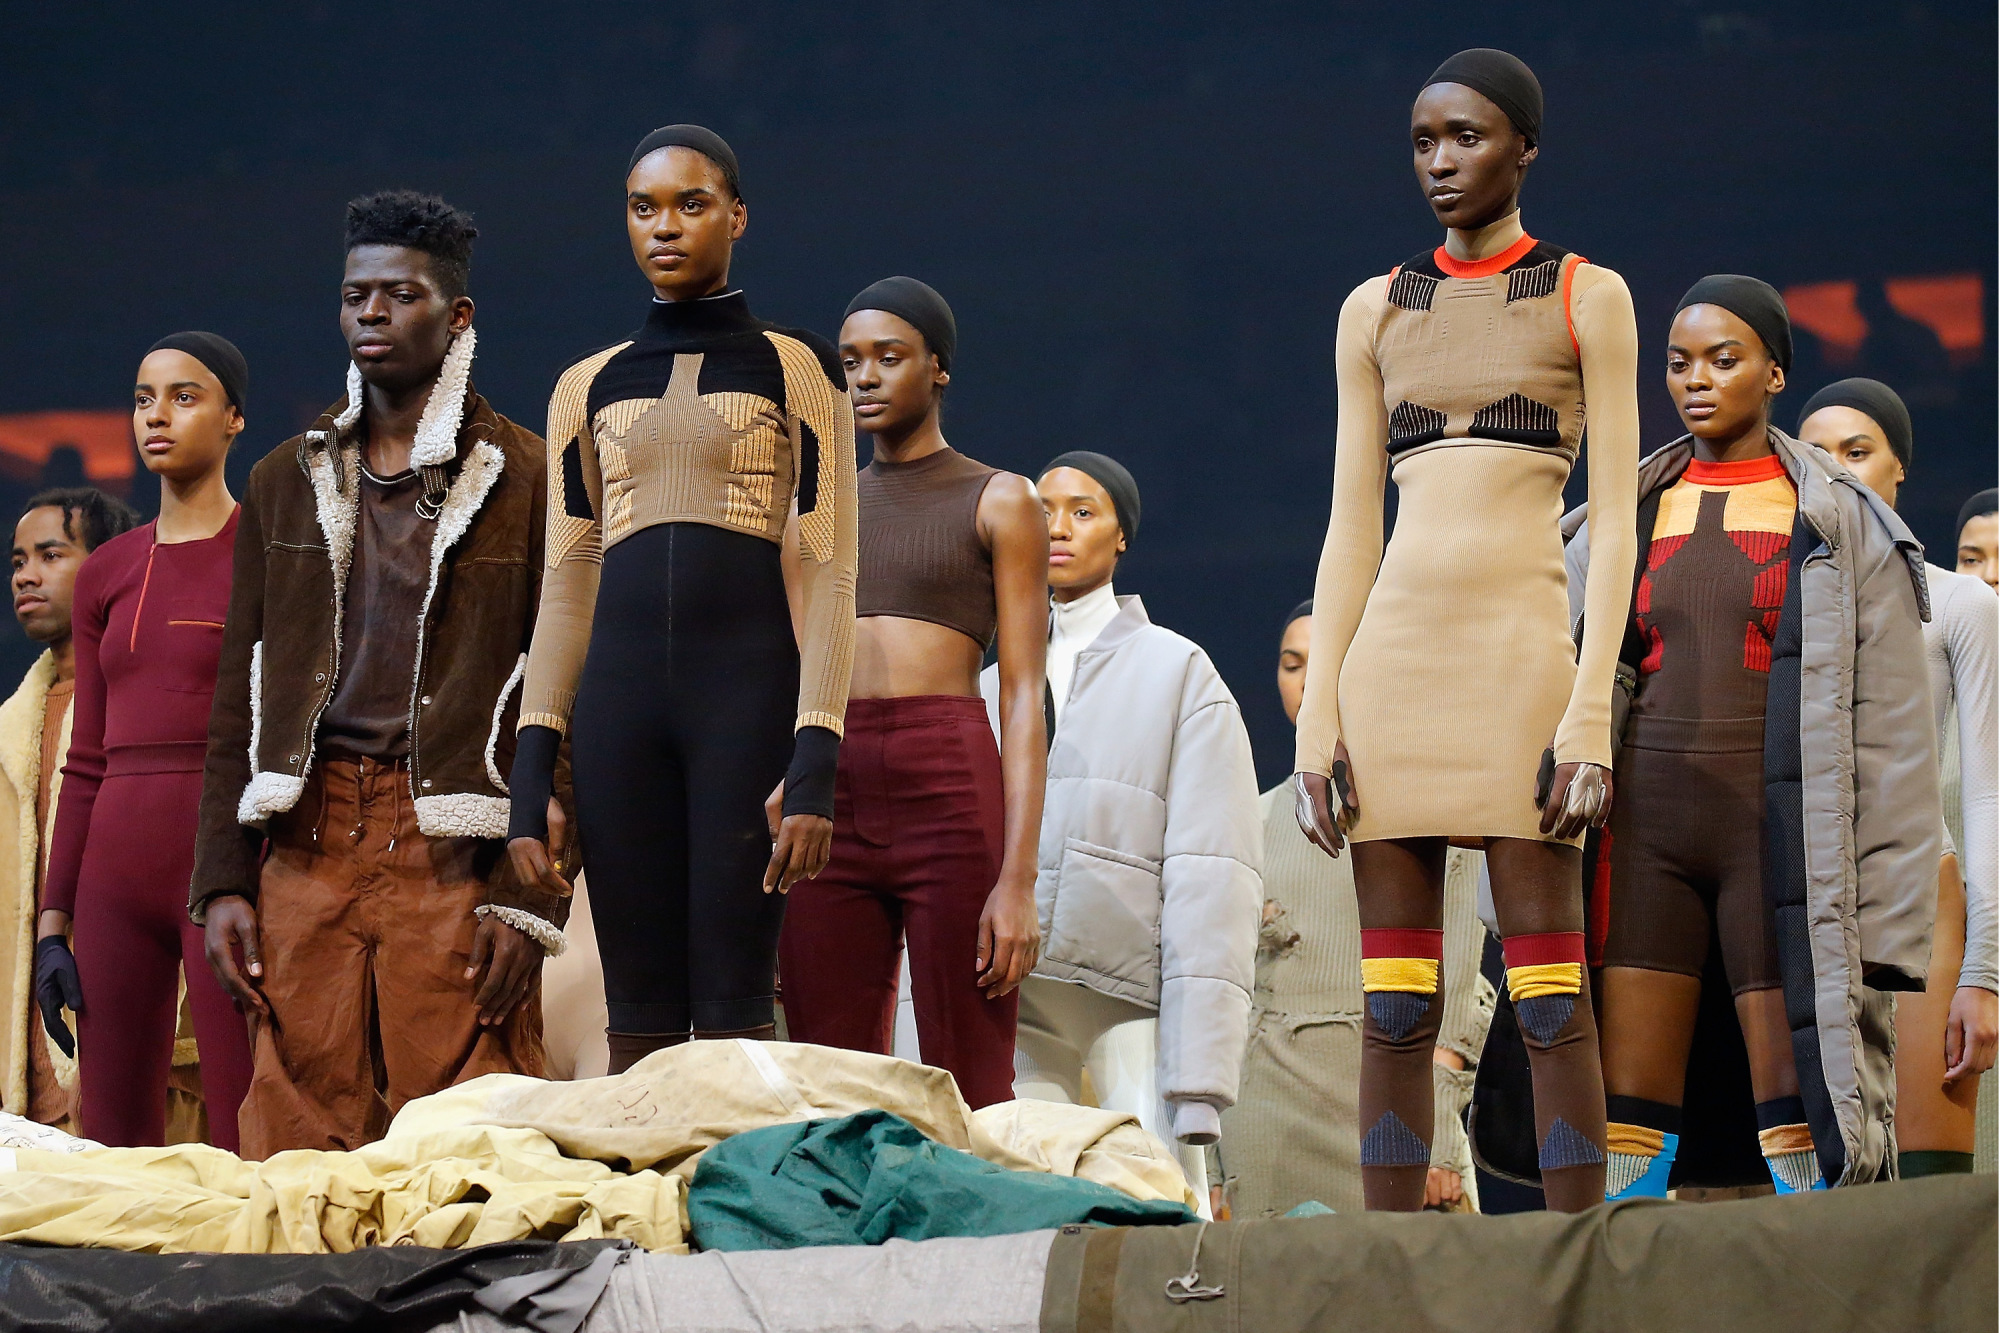 Five things we learned from Rihanna's Fenty x Puma show at New